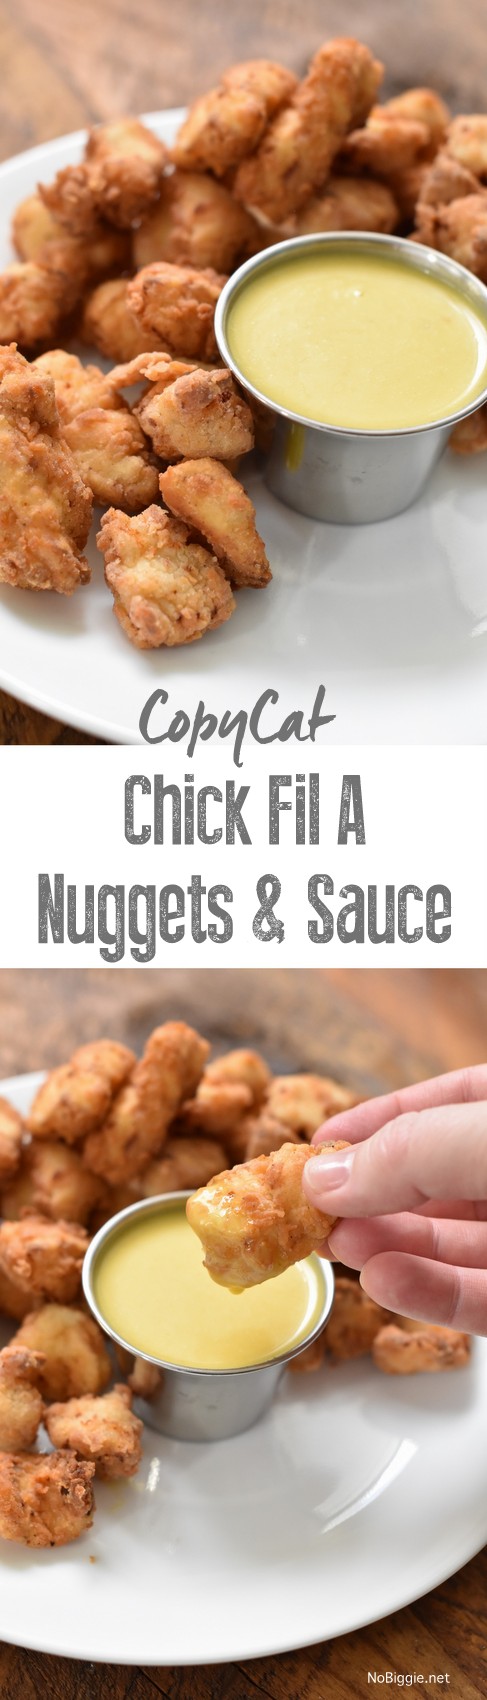 Copy Cat Chick FIL A Nuggets and Sauce | NoBiggie.net